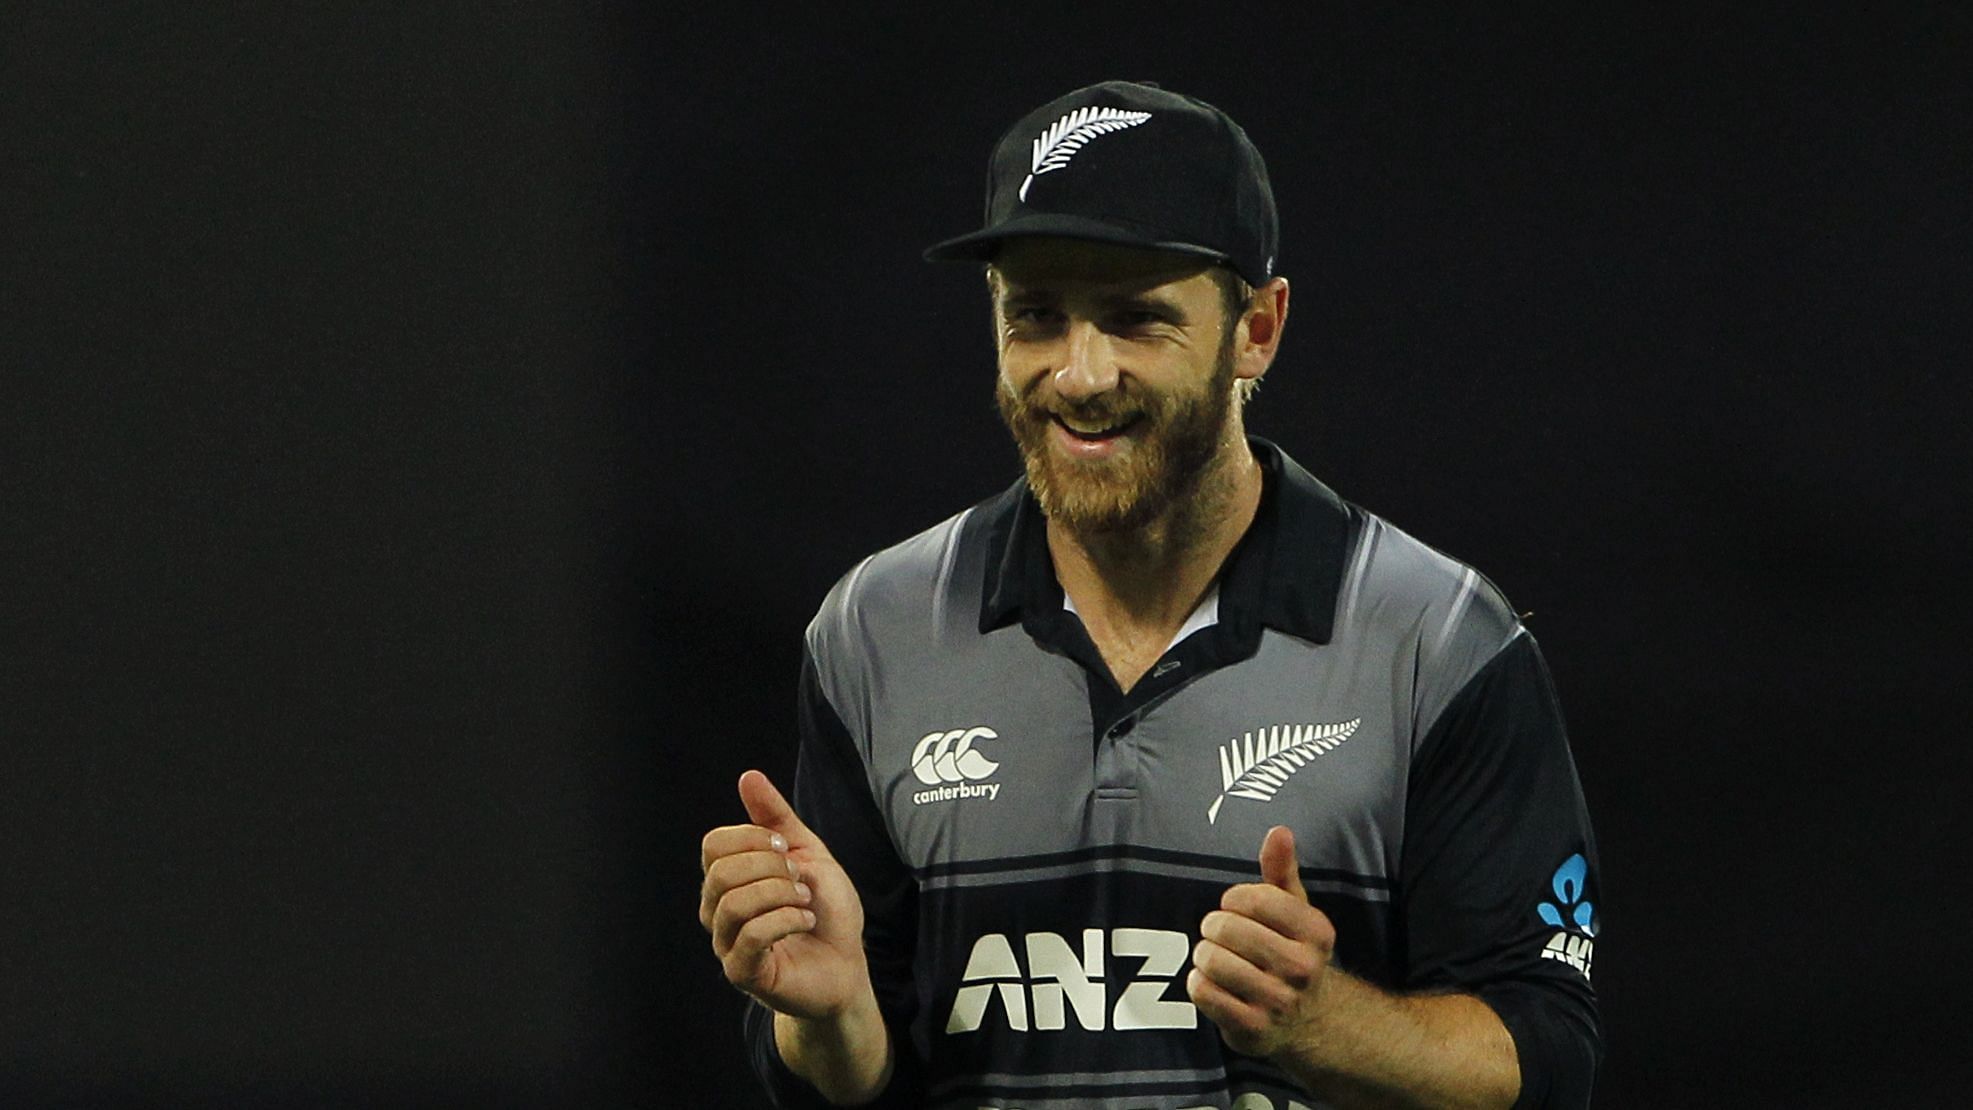 Kane Williamson has been ruled out of the T20 series against England due to injury.